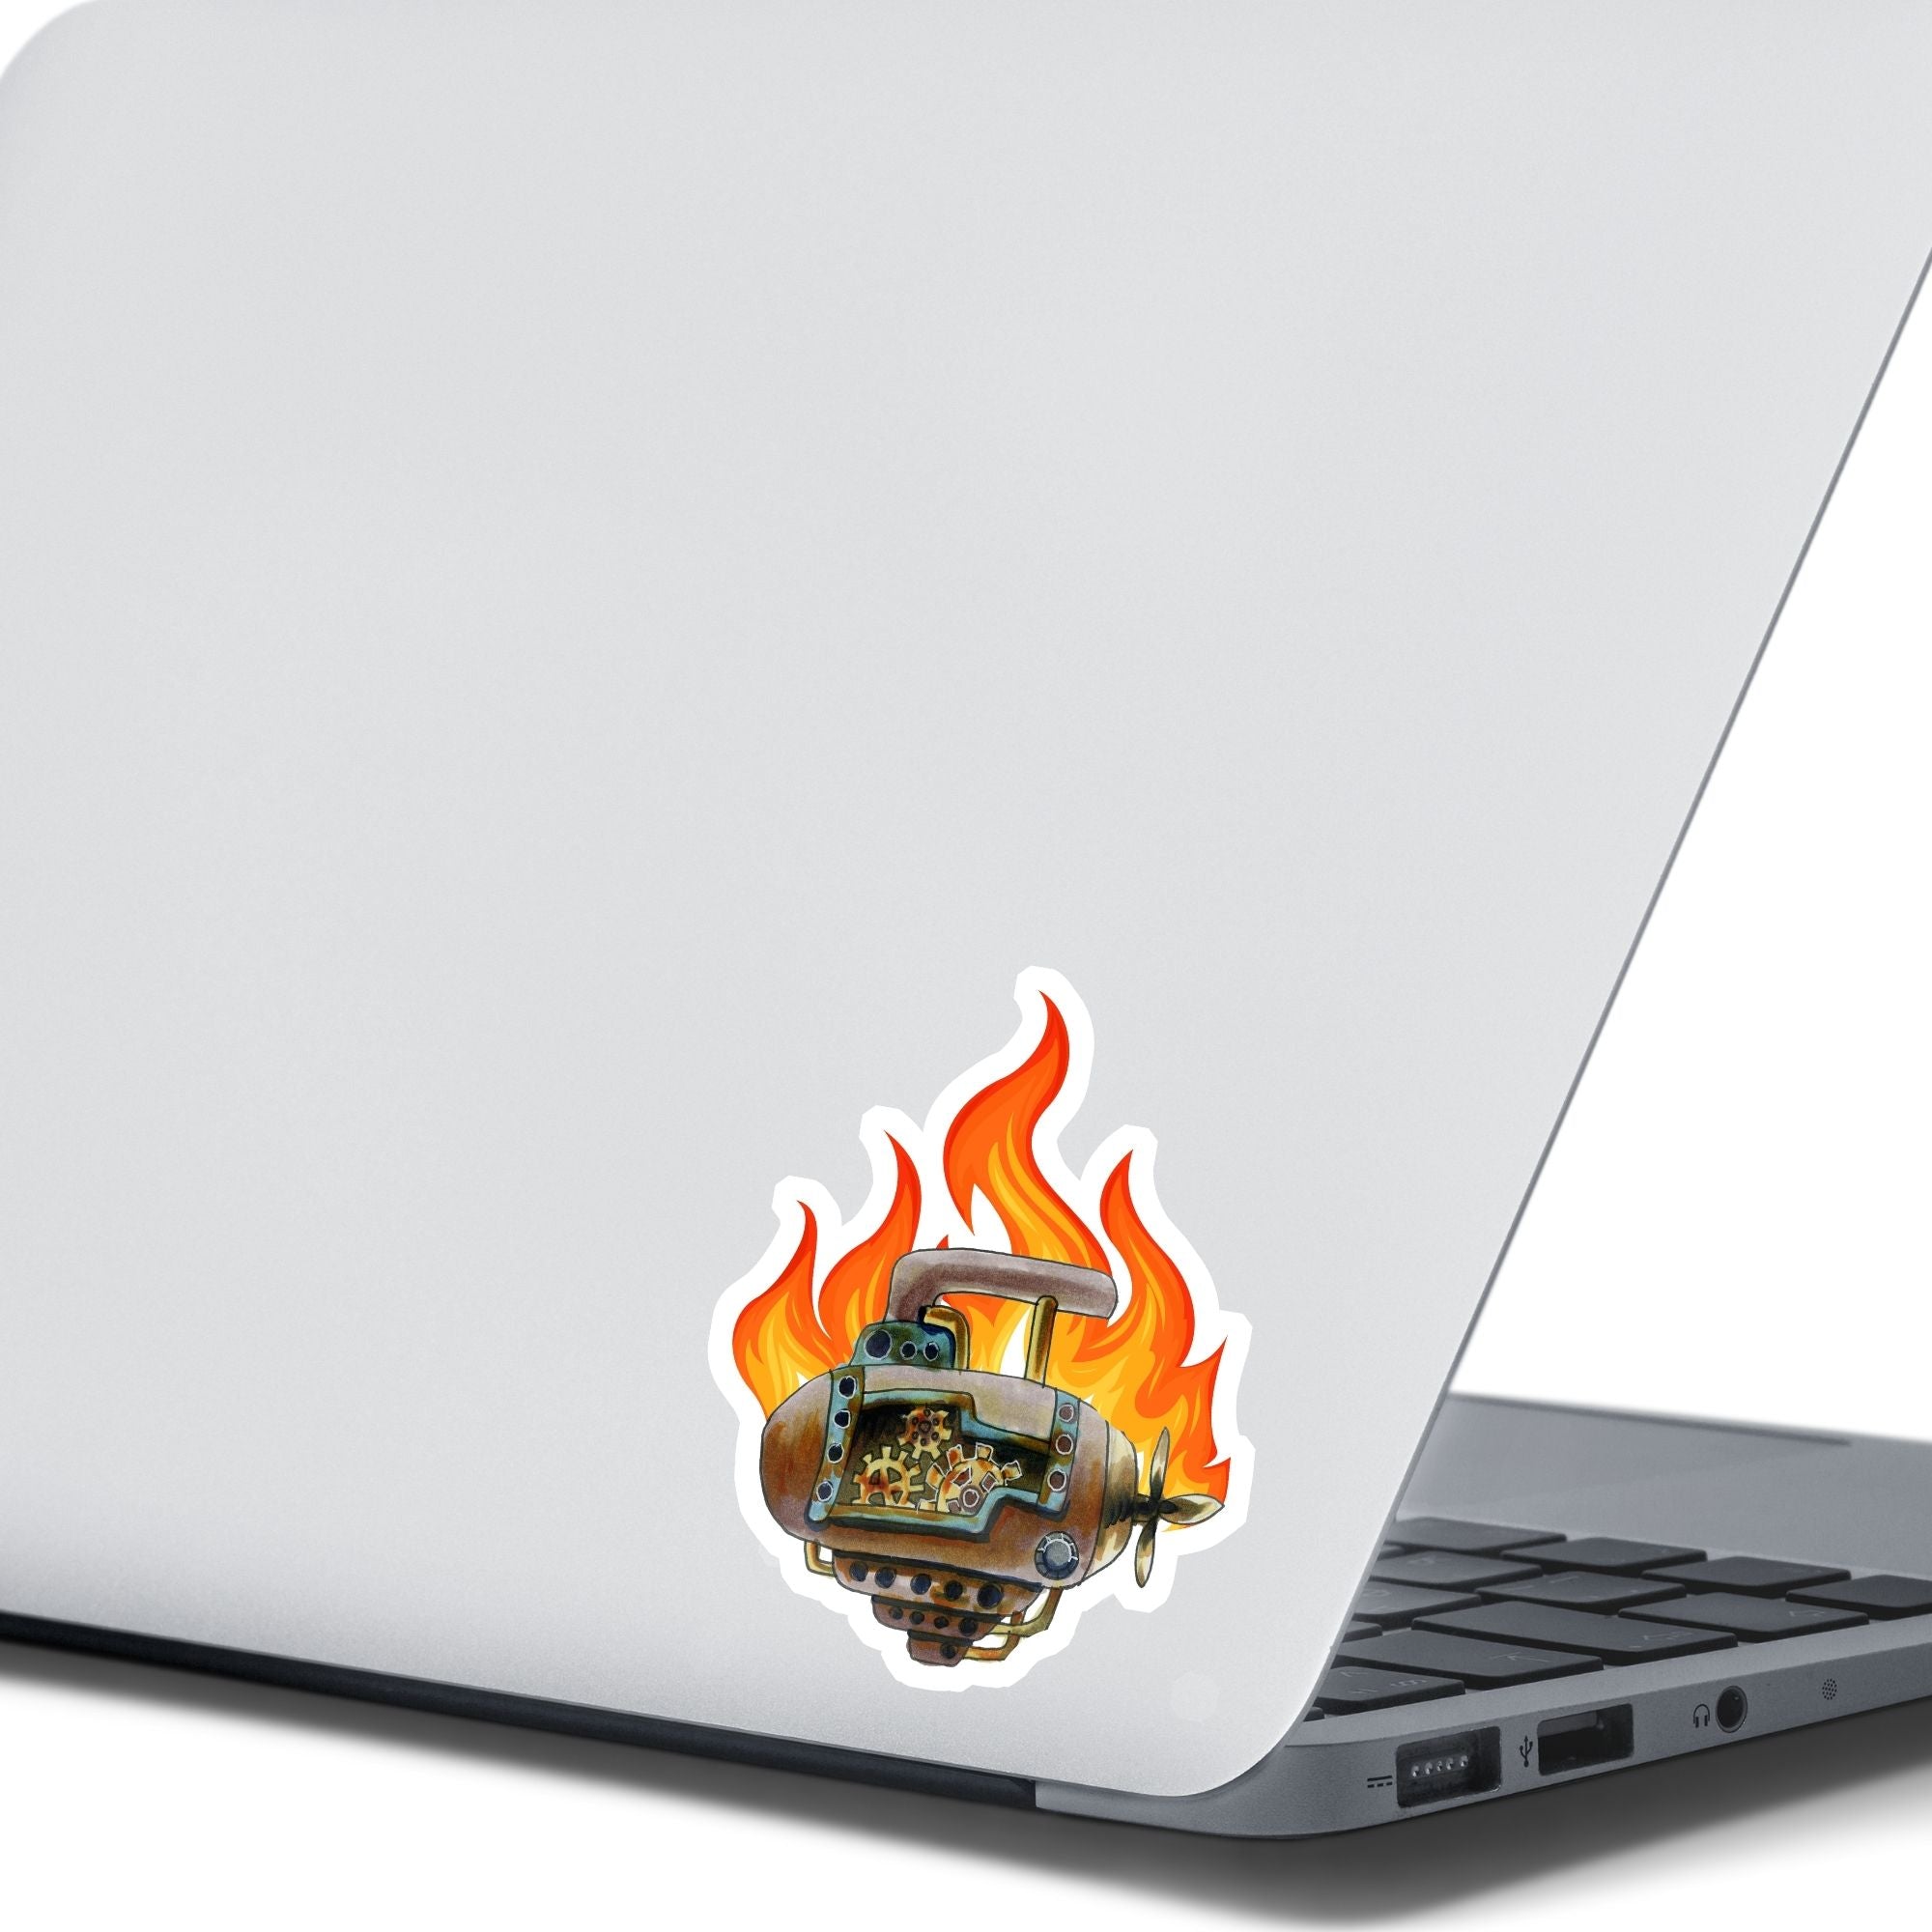 This individual die-cut steampunk sticker features a brown engine with a cutaway to show the gears inside, on a background of yellow, orange, and red flames. This image shows the steampunk engine sticker on the back of an open laptop.